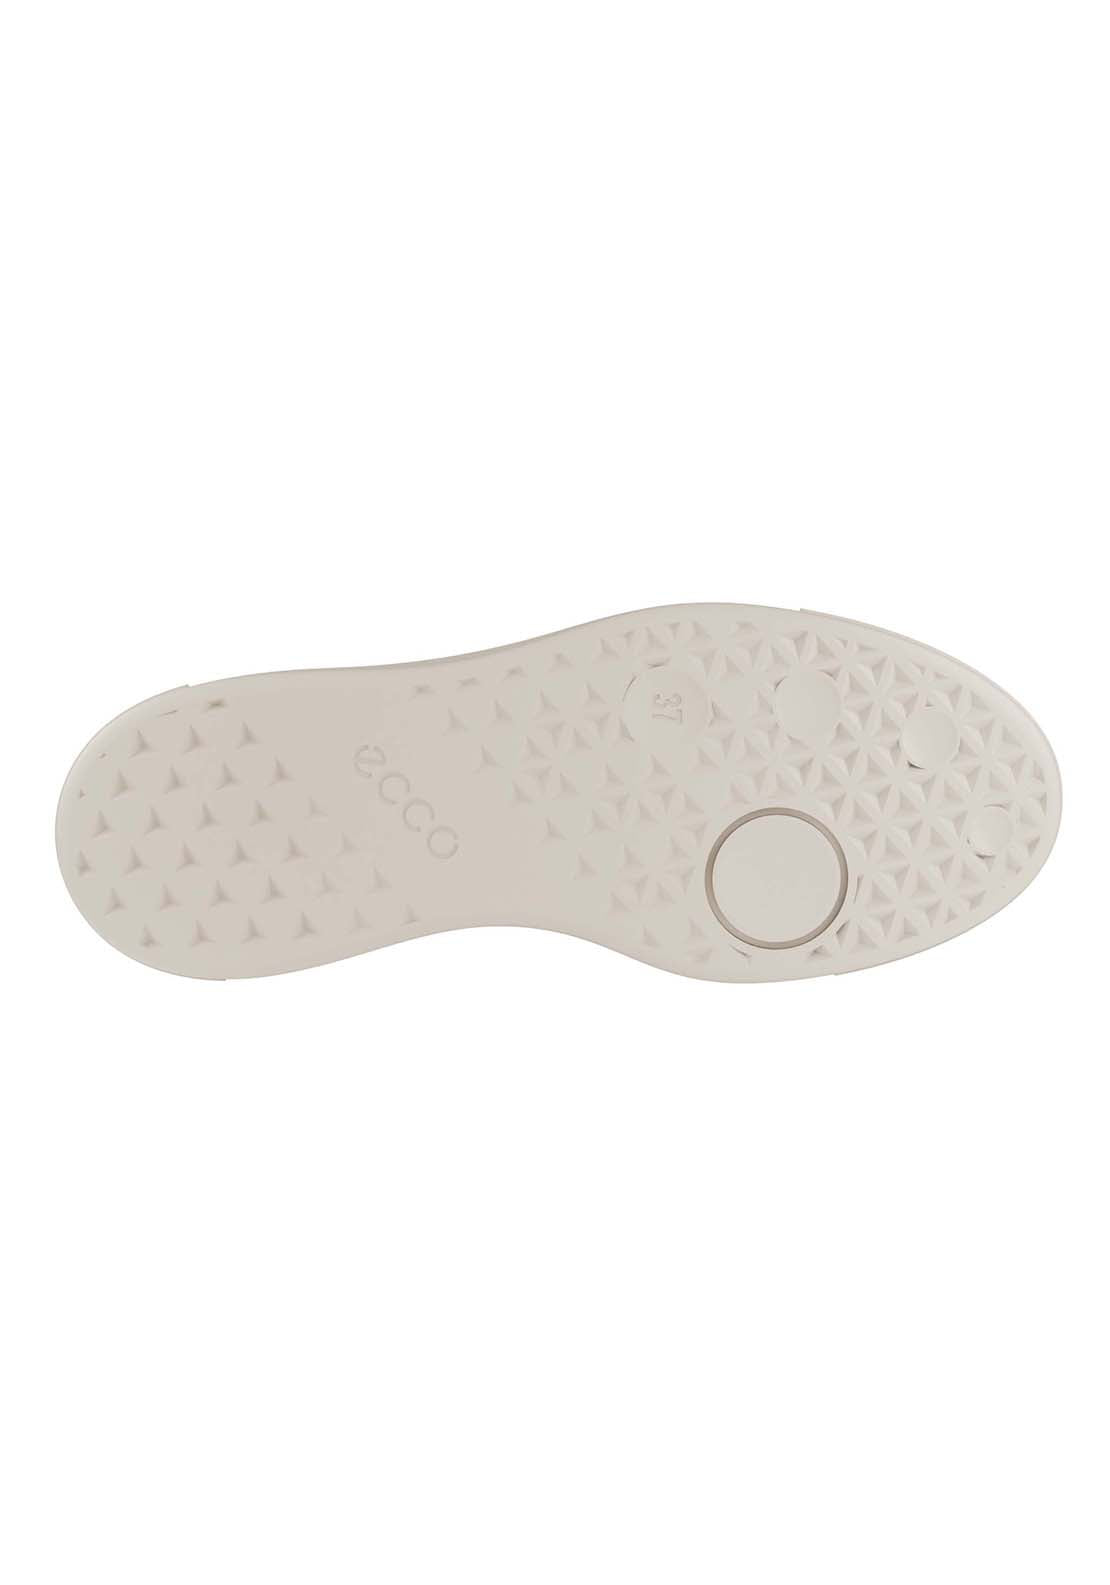 Ecco Street Tray Casual Shoe 2 Shaws Department Stores